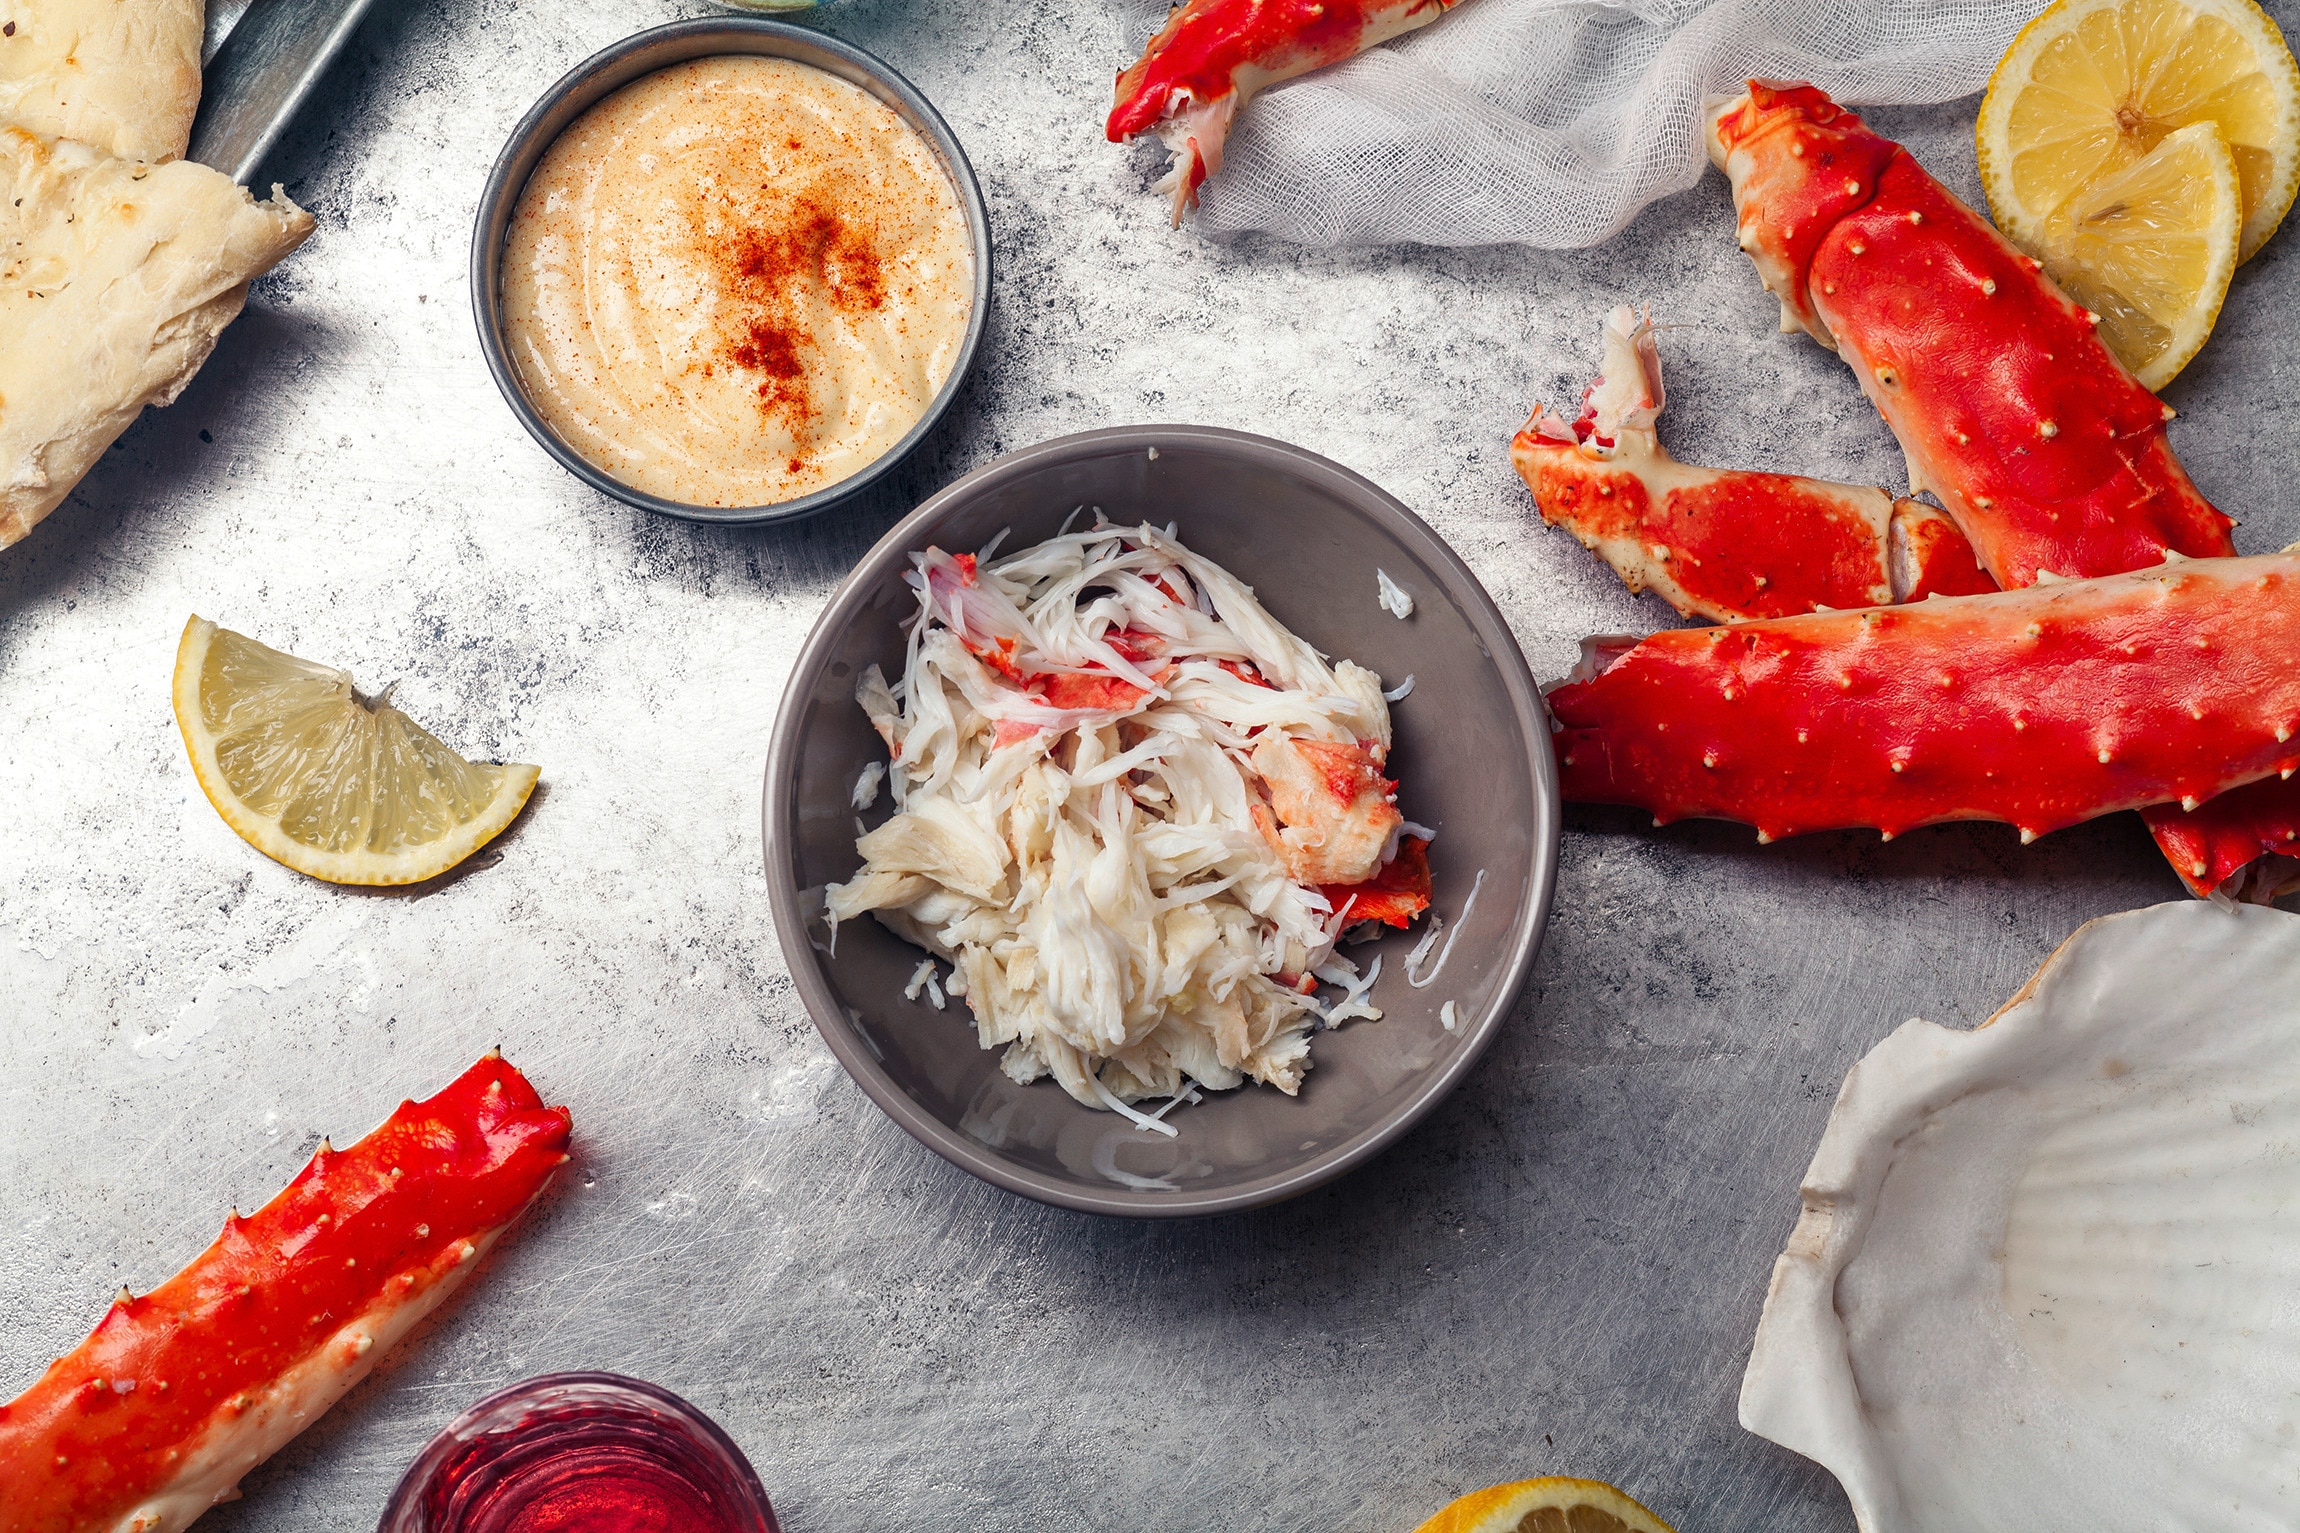 A bowl of shredded crab meat next to a saucer of aioli and crab legs